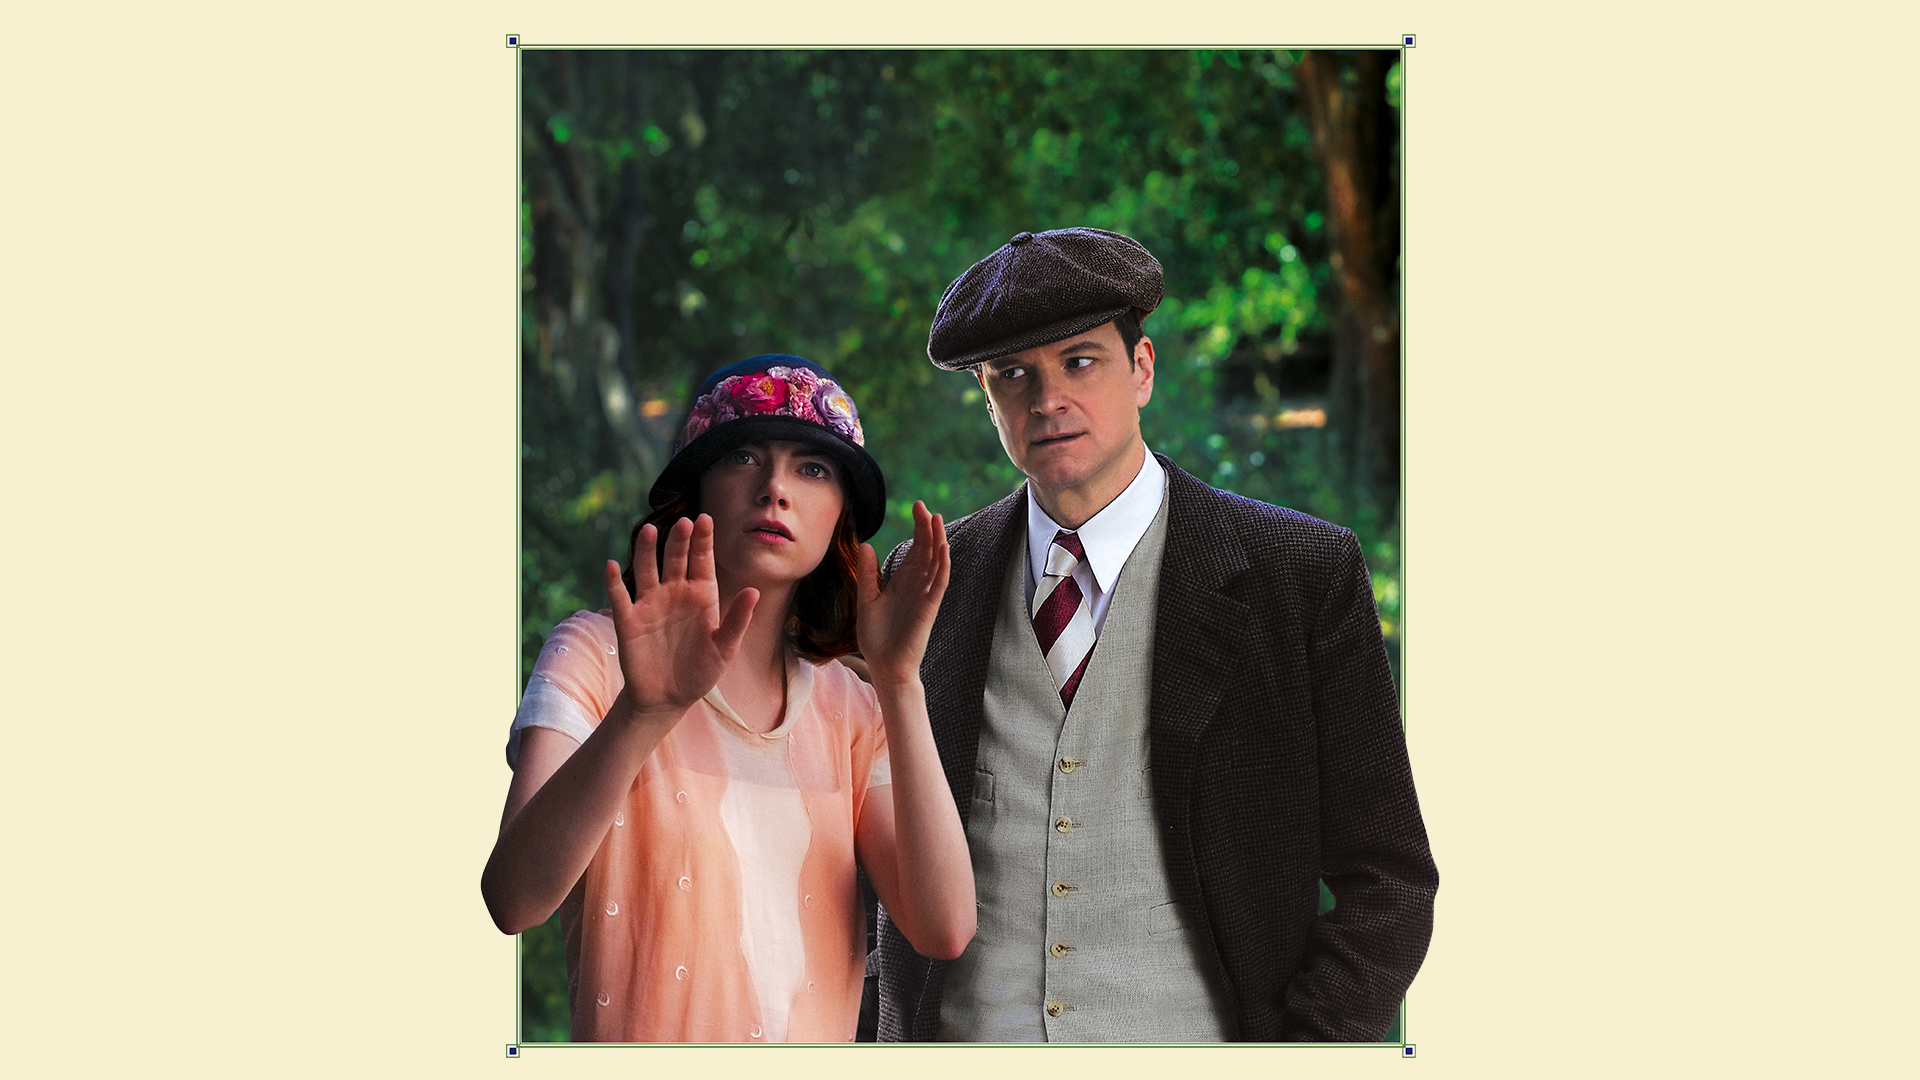 Movie Magic In The Moonlight HD Wallpaper | Background Image